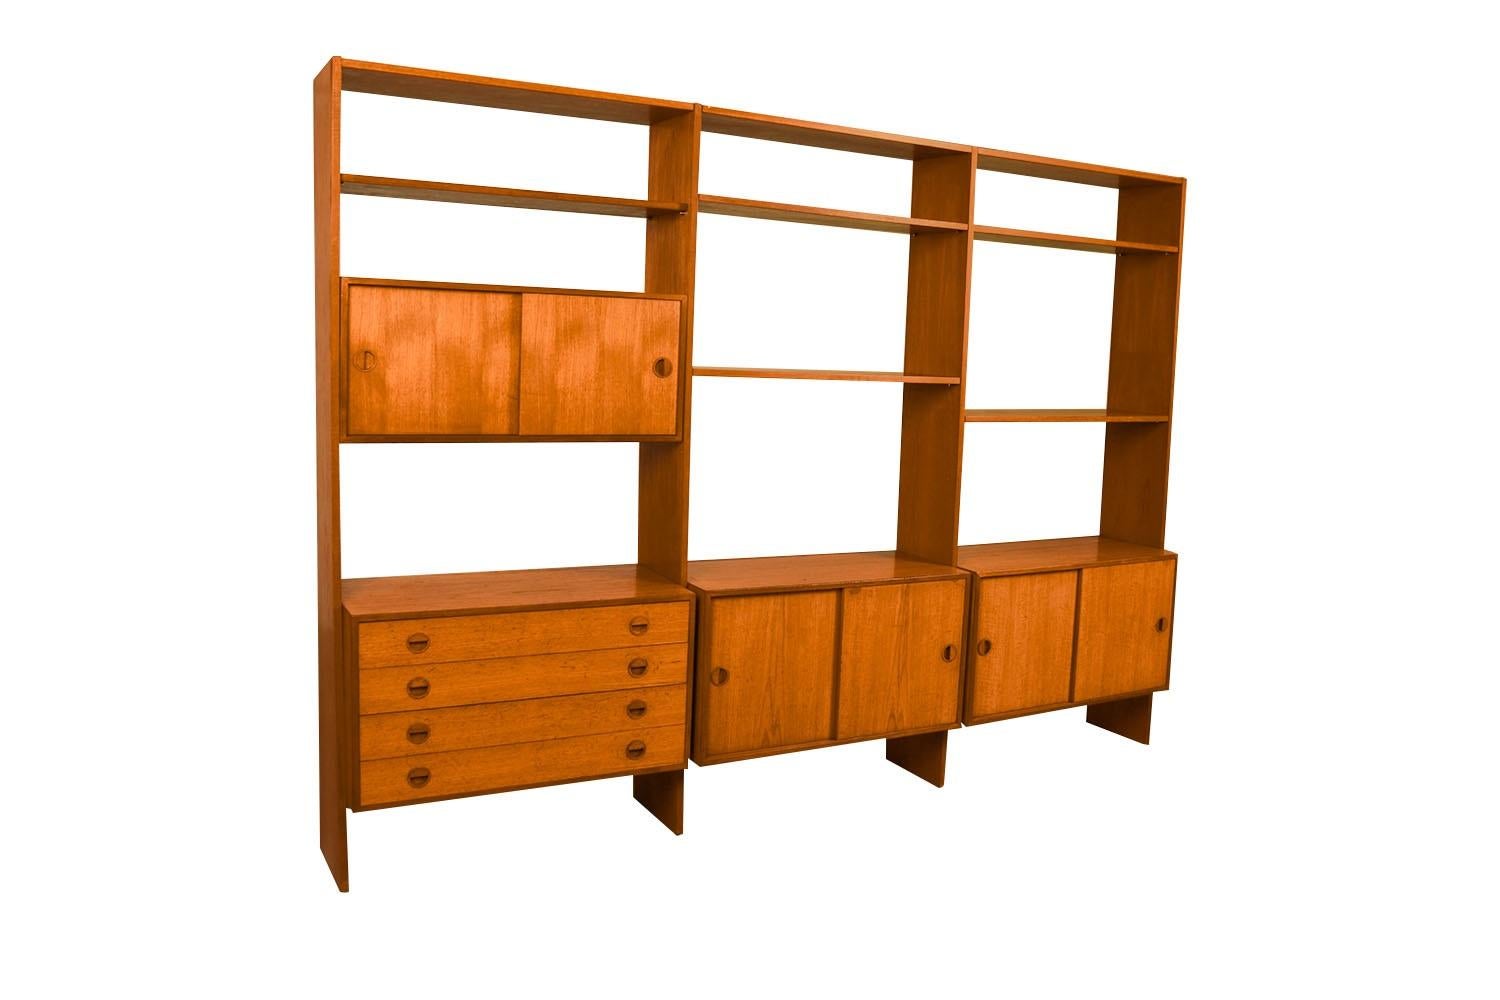 A remarkable teak, freestanding, modular, room divider, three bay bookcase, cabinet, made in Denmark by Hansen & Guldborg features gorgeous teak tones and grain. Right side offers two open-adjustable shelf areas with a lower double door cabinet